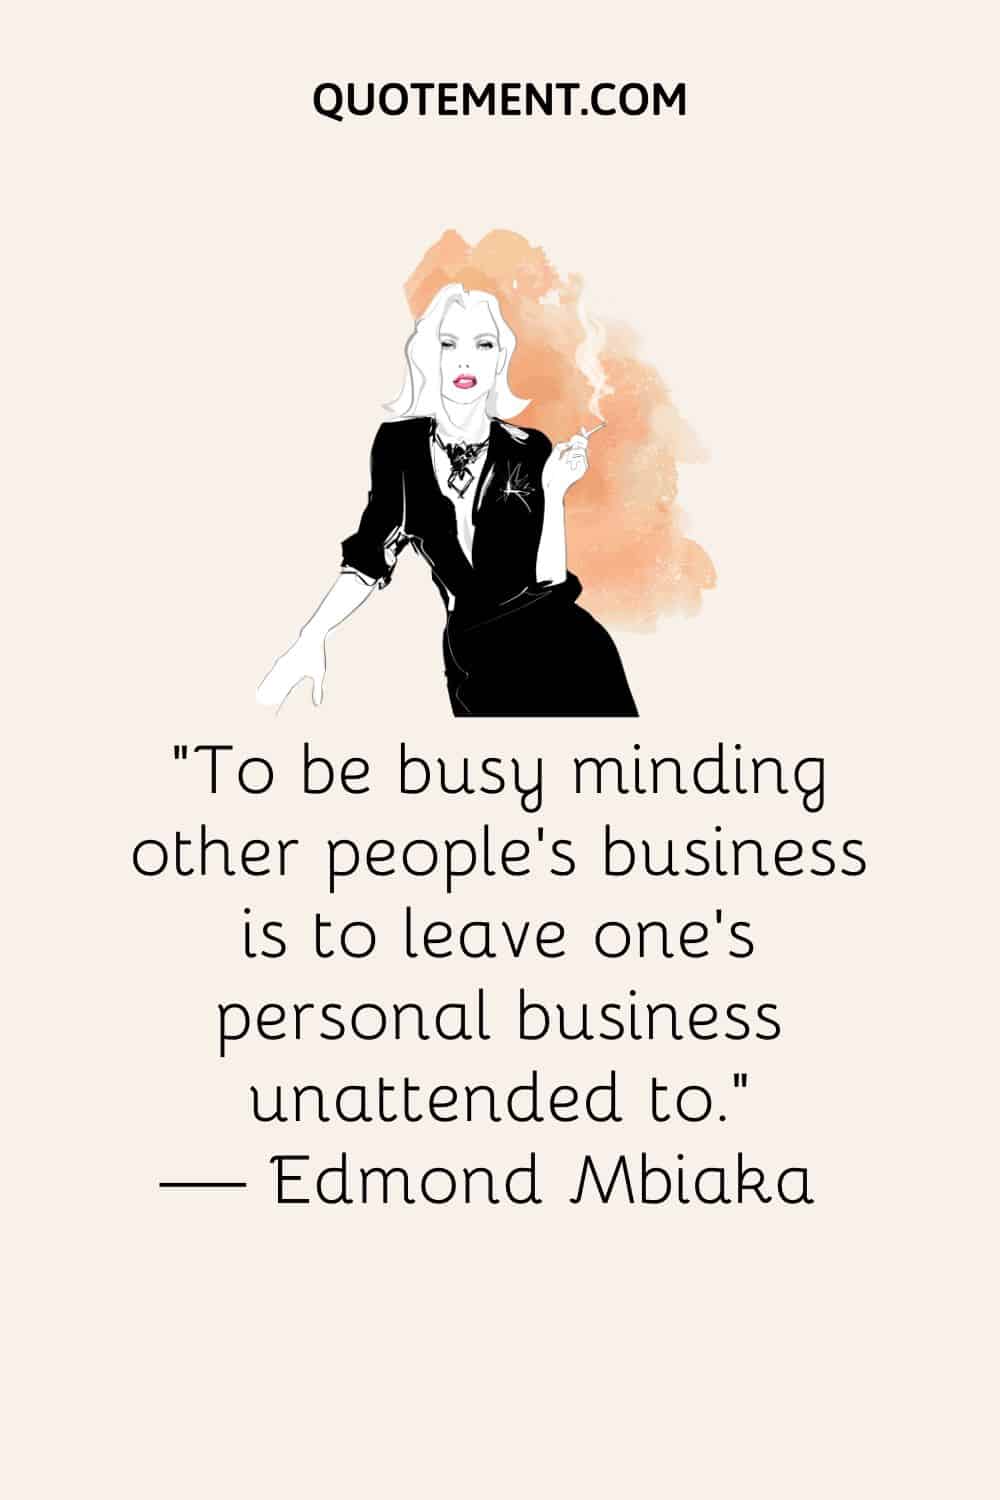 To be busy minding other people's business is to leave one's personal business unattended to